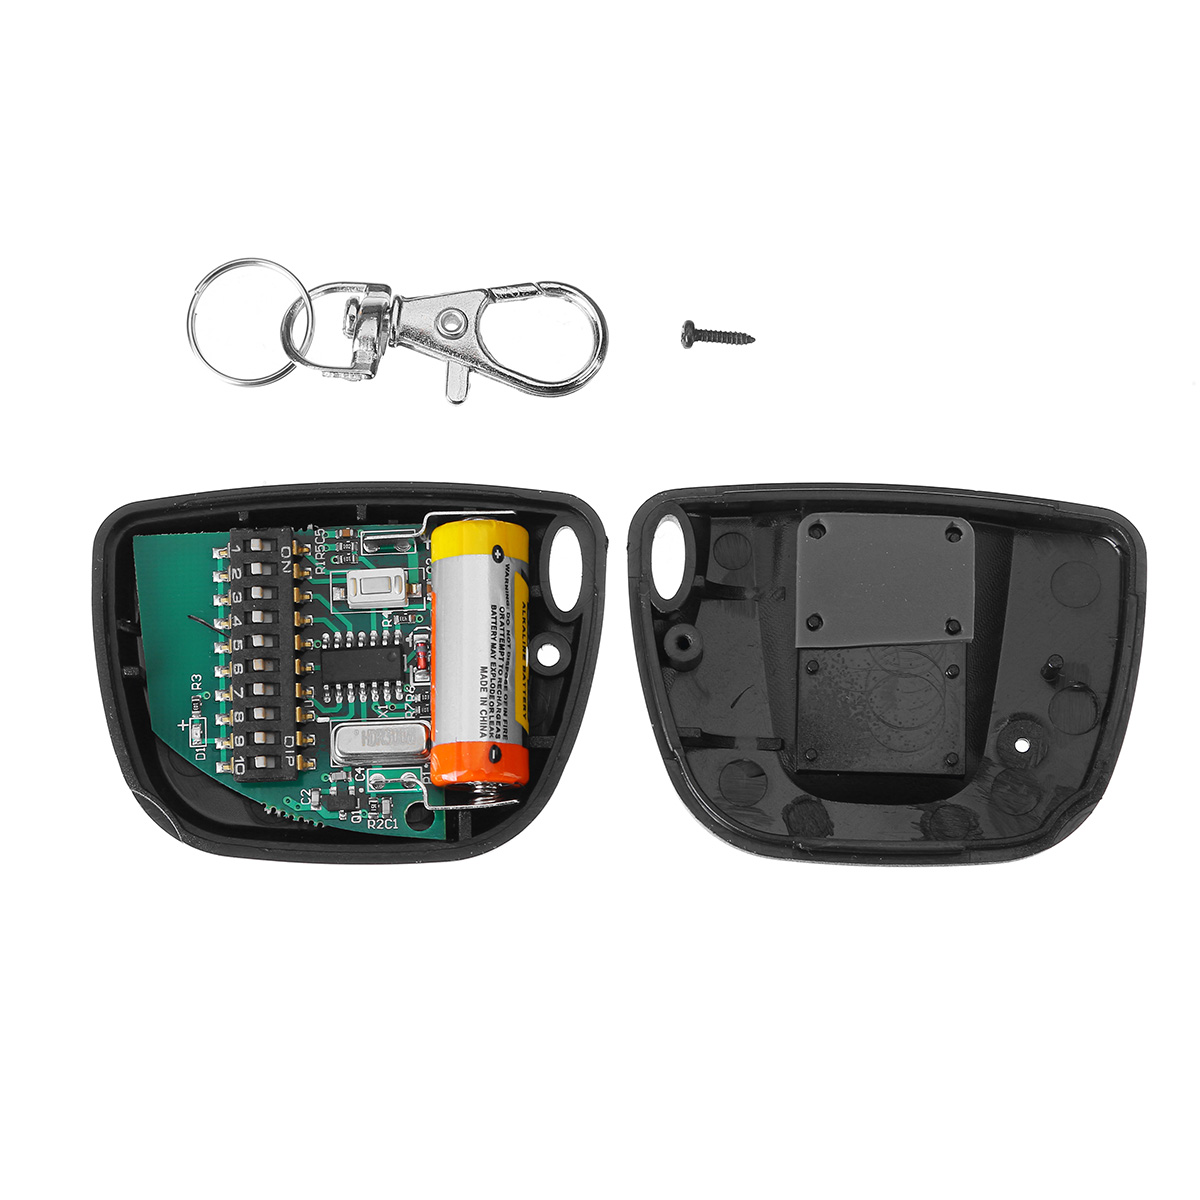 Garage Door Opener Replaces Multicode 3089 10 Dip Switch 300Mhz Key Chain Remote 1 Button